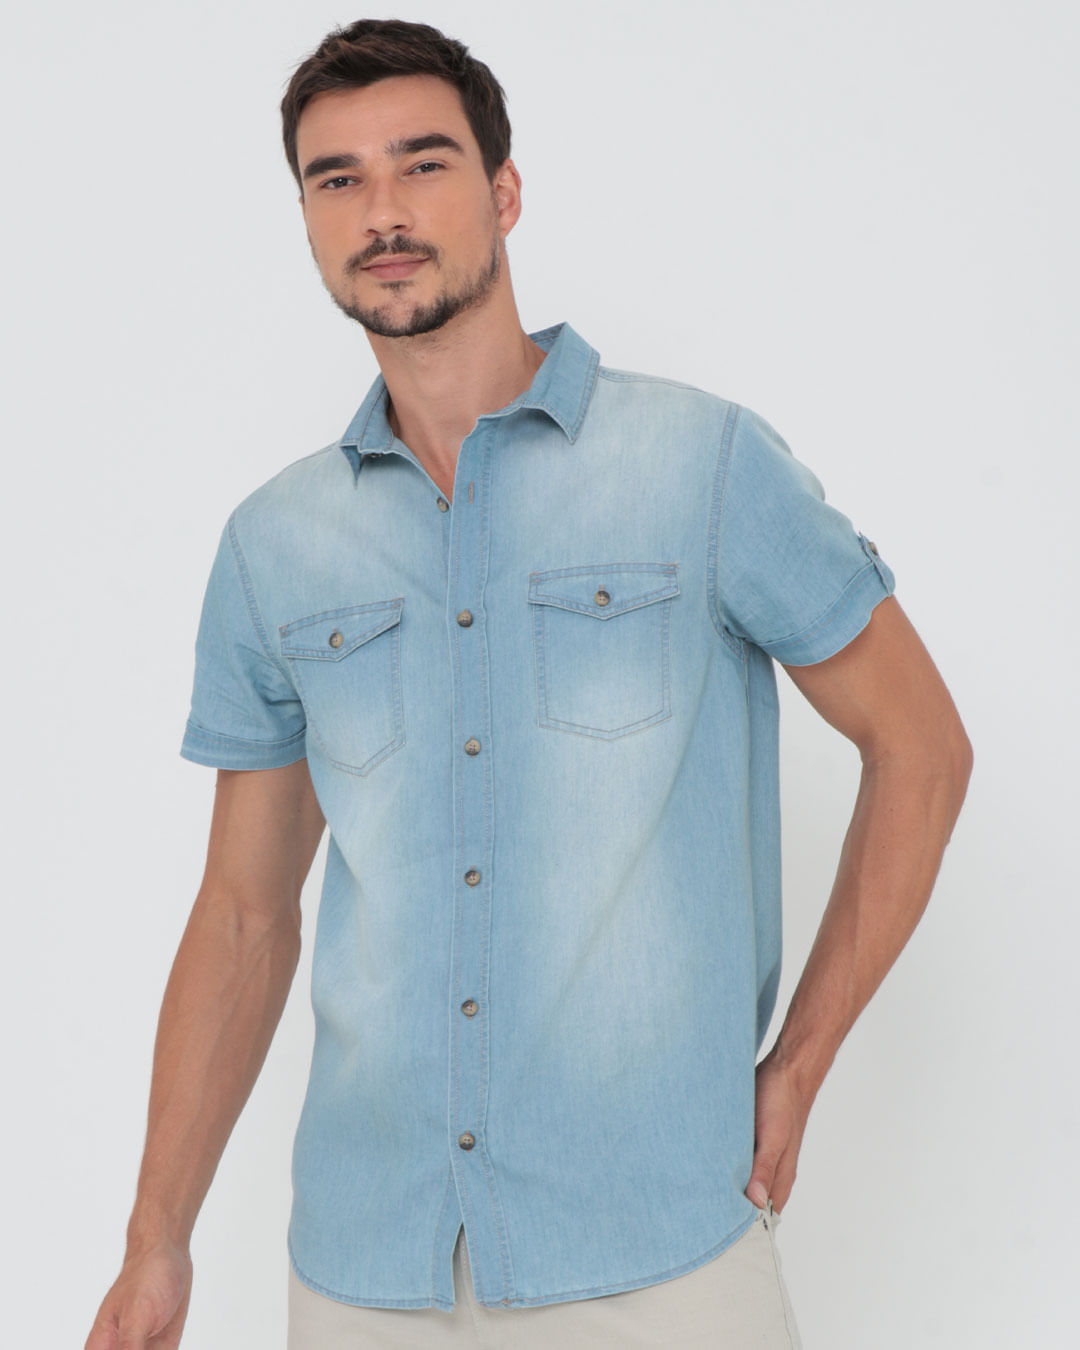 Camisa-215357-Jeans-Mc-C-Bso-Ct---Blue-Jeans-Claro